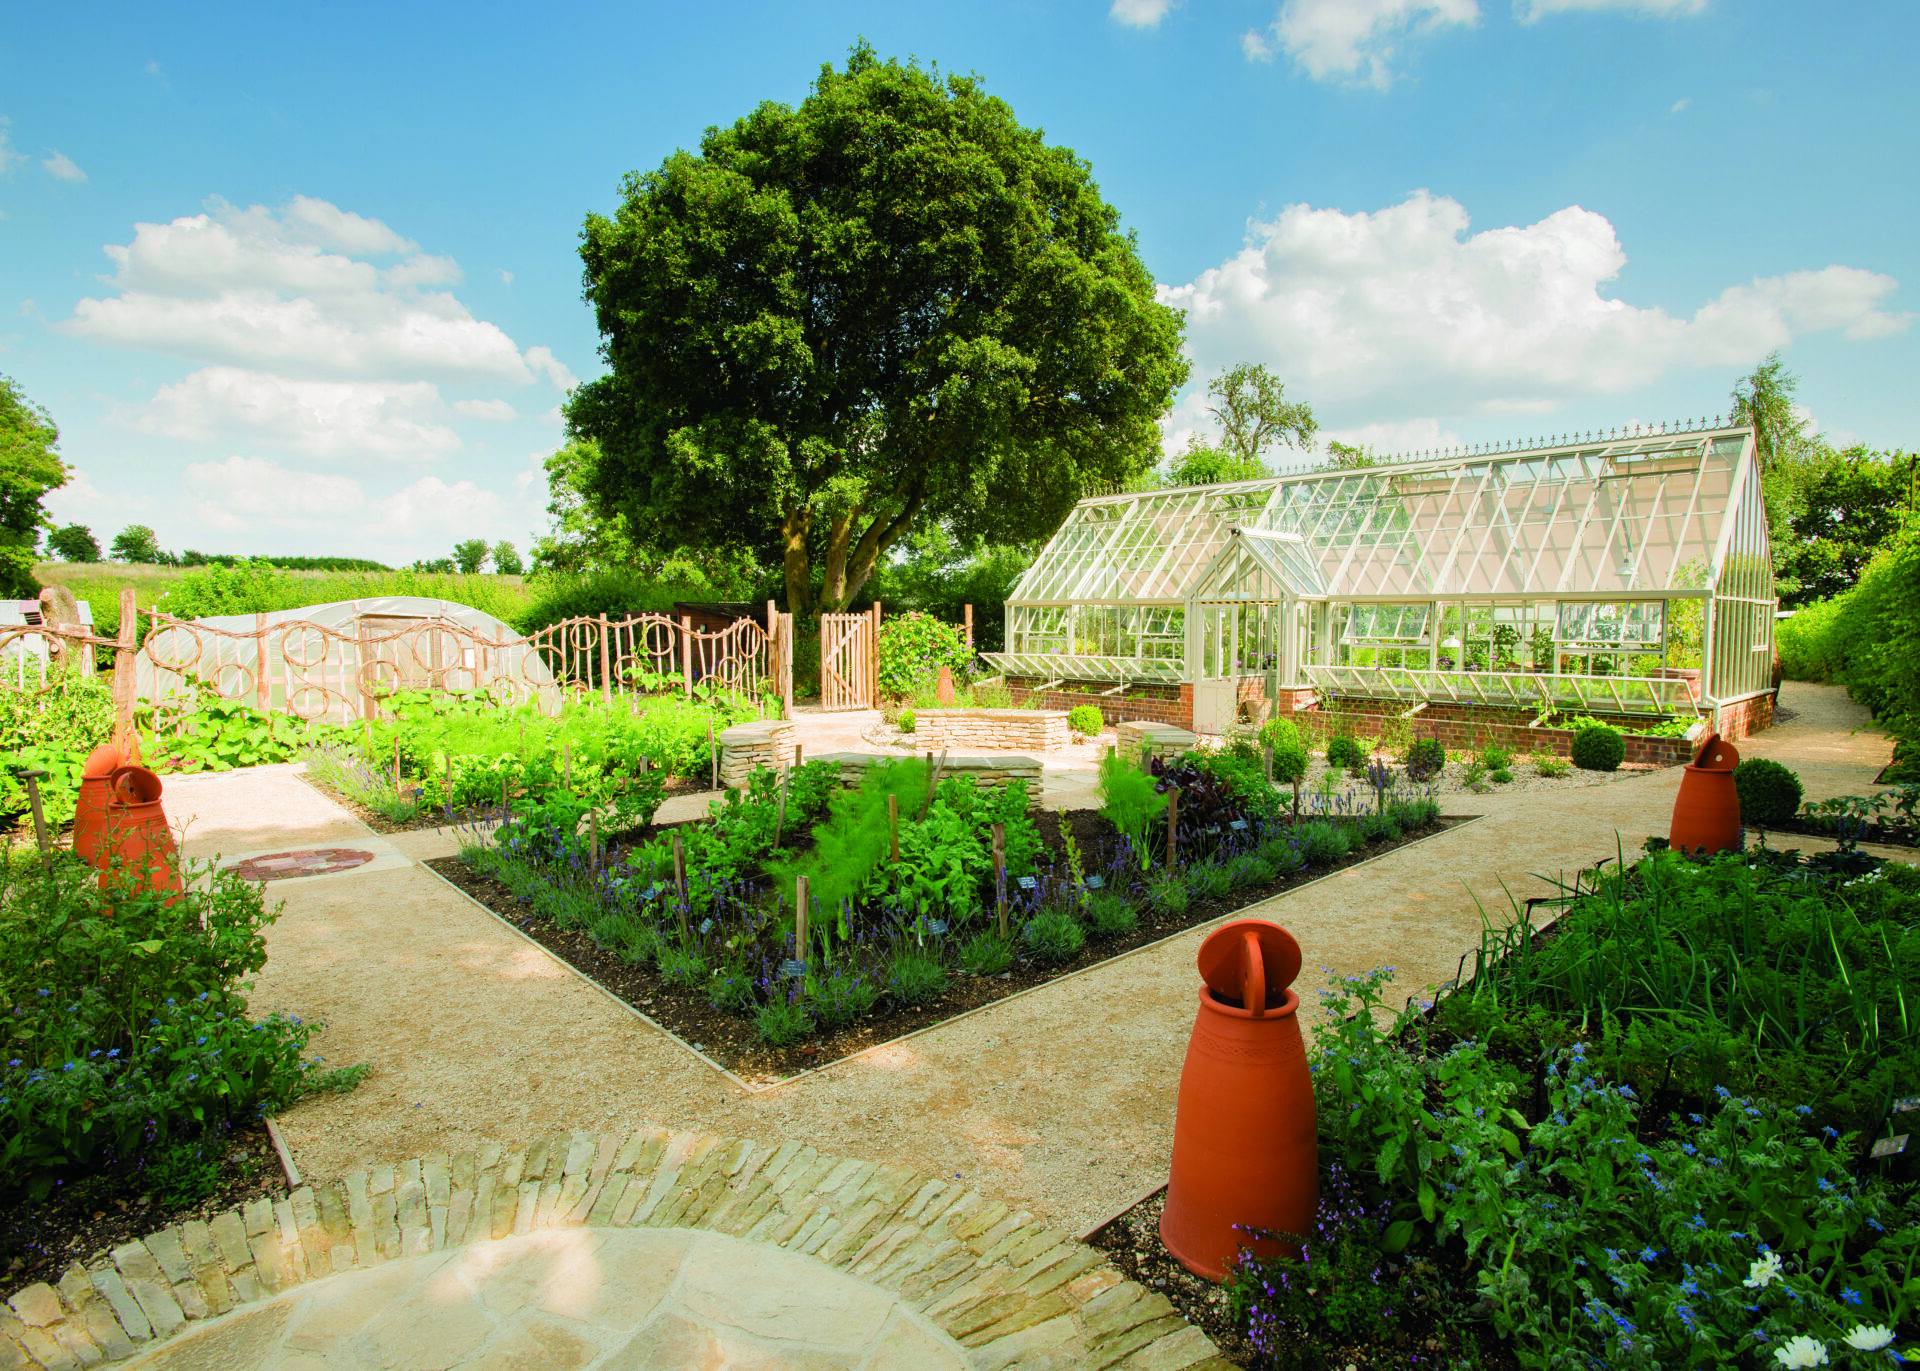 The gardens and greenhouses on Le Manoir estate